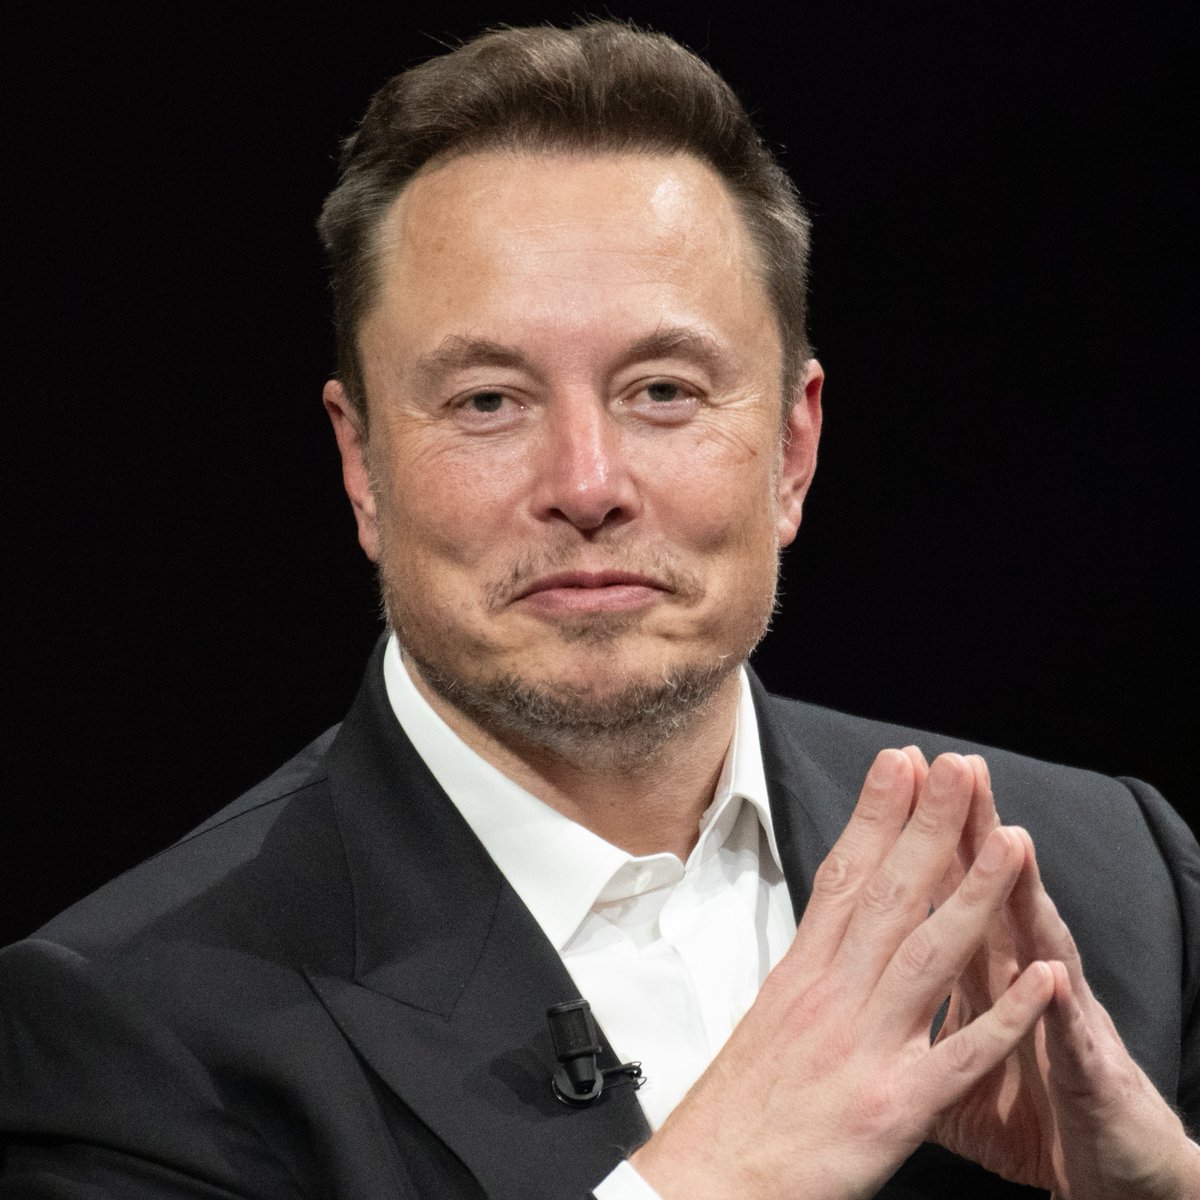 🚨BREAKING: Elon Musk says if someone tears down the American flag and puts up another flag in its place, that person should get a mandatory one-way trip to that flag's country. Do you agree? If YES, I will follow you back! 🇺🇸